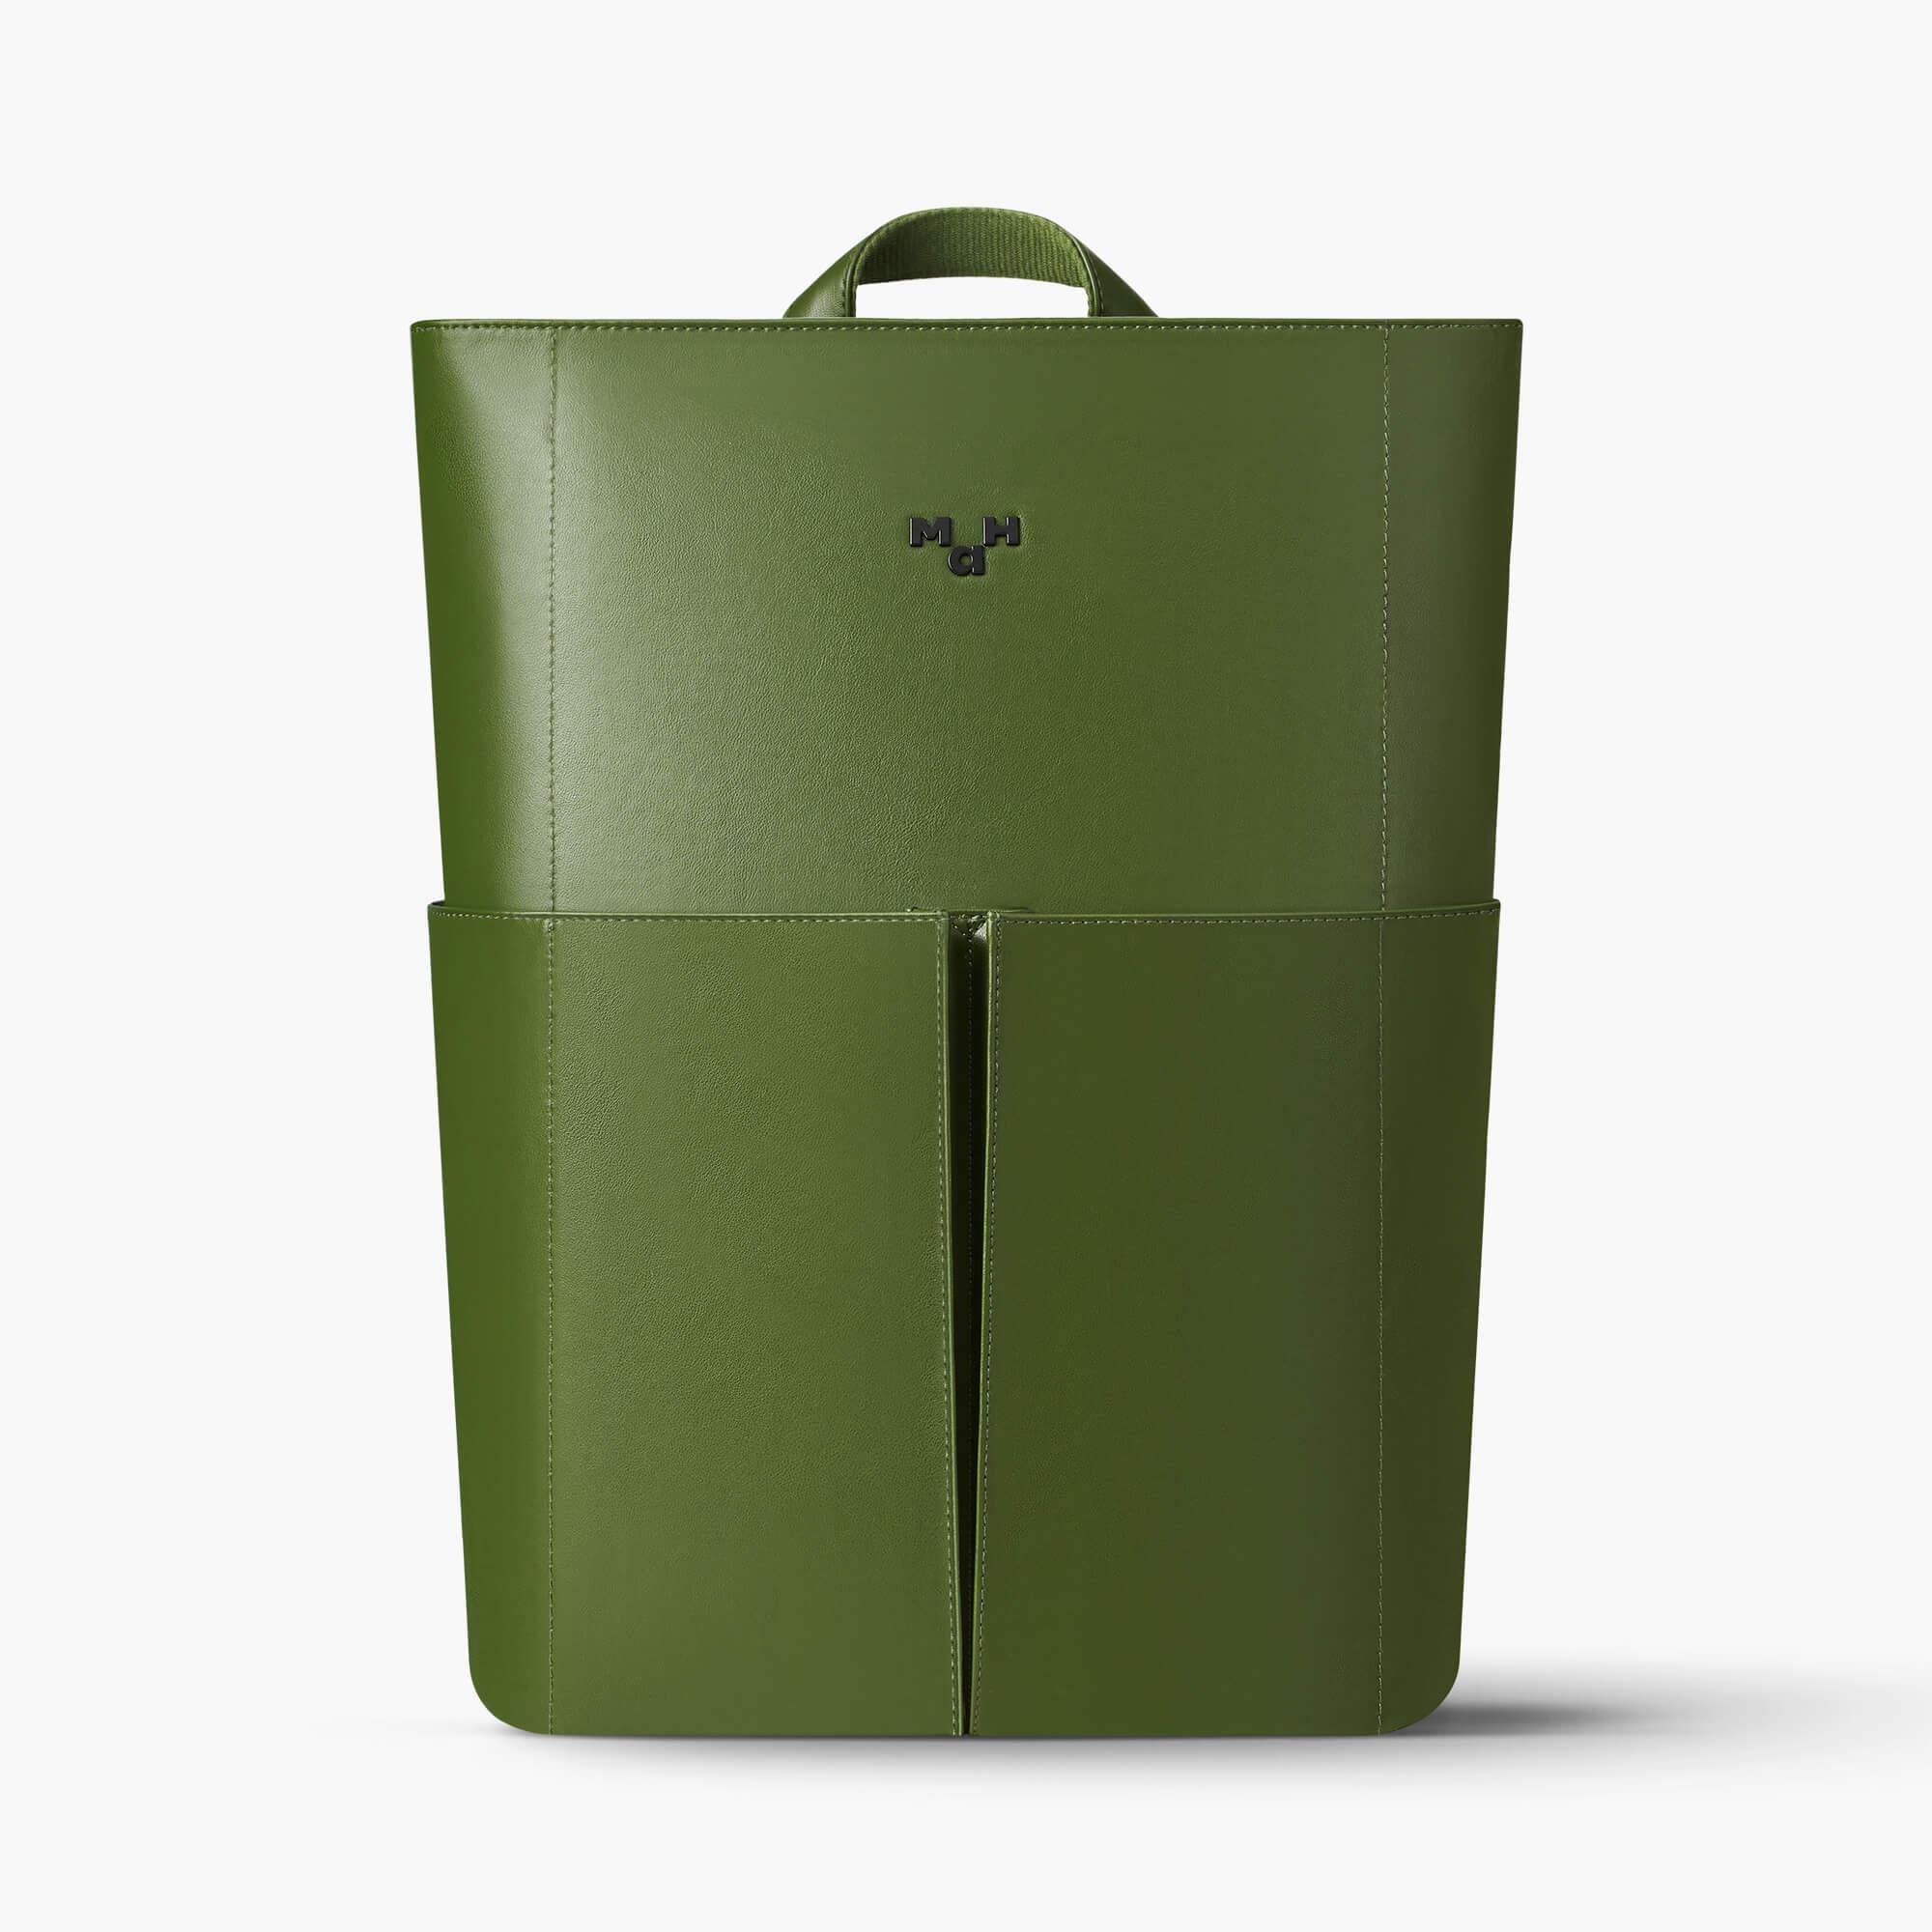 Cactus Leather Backpack